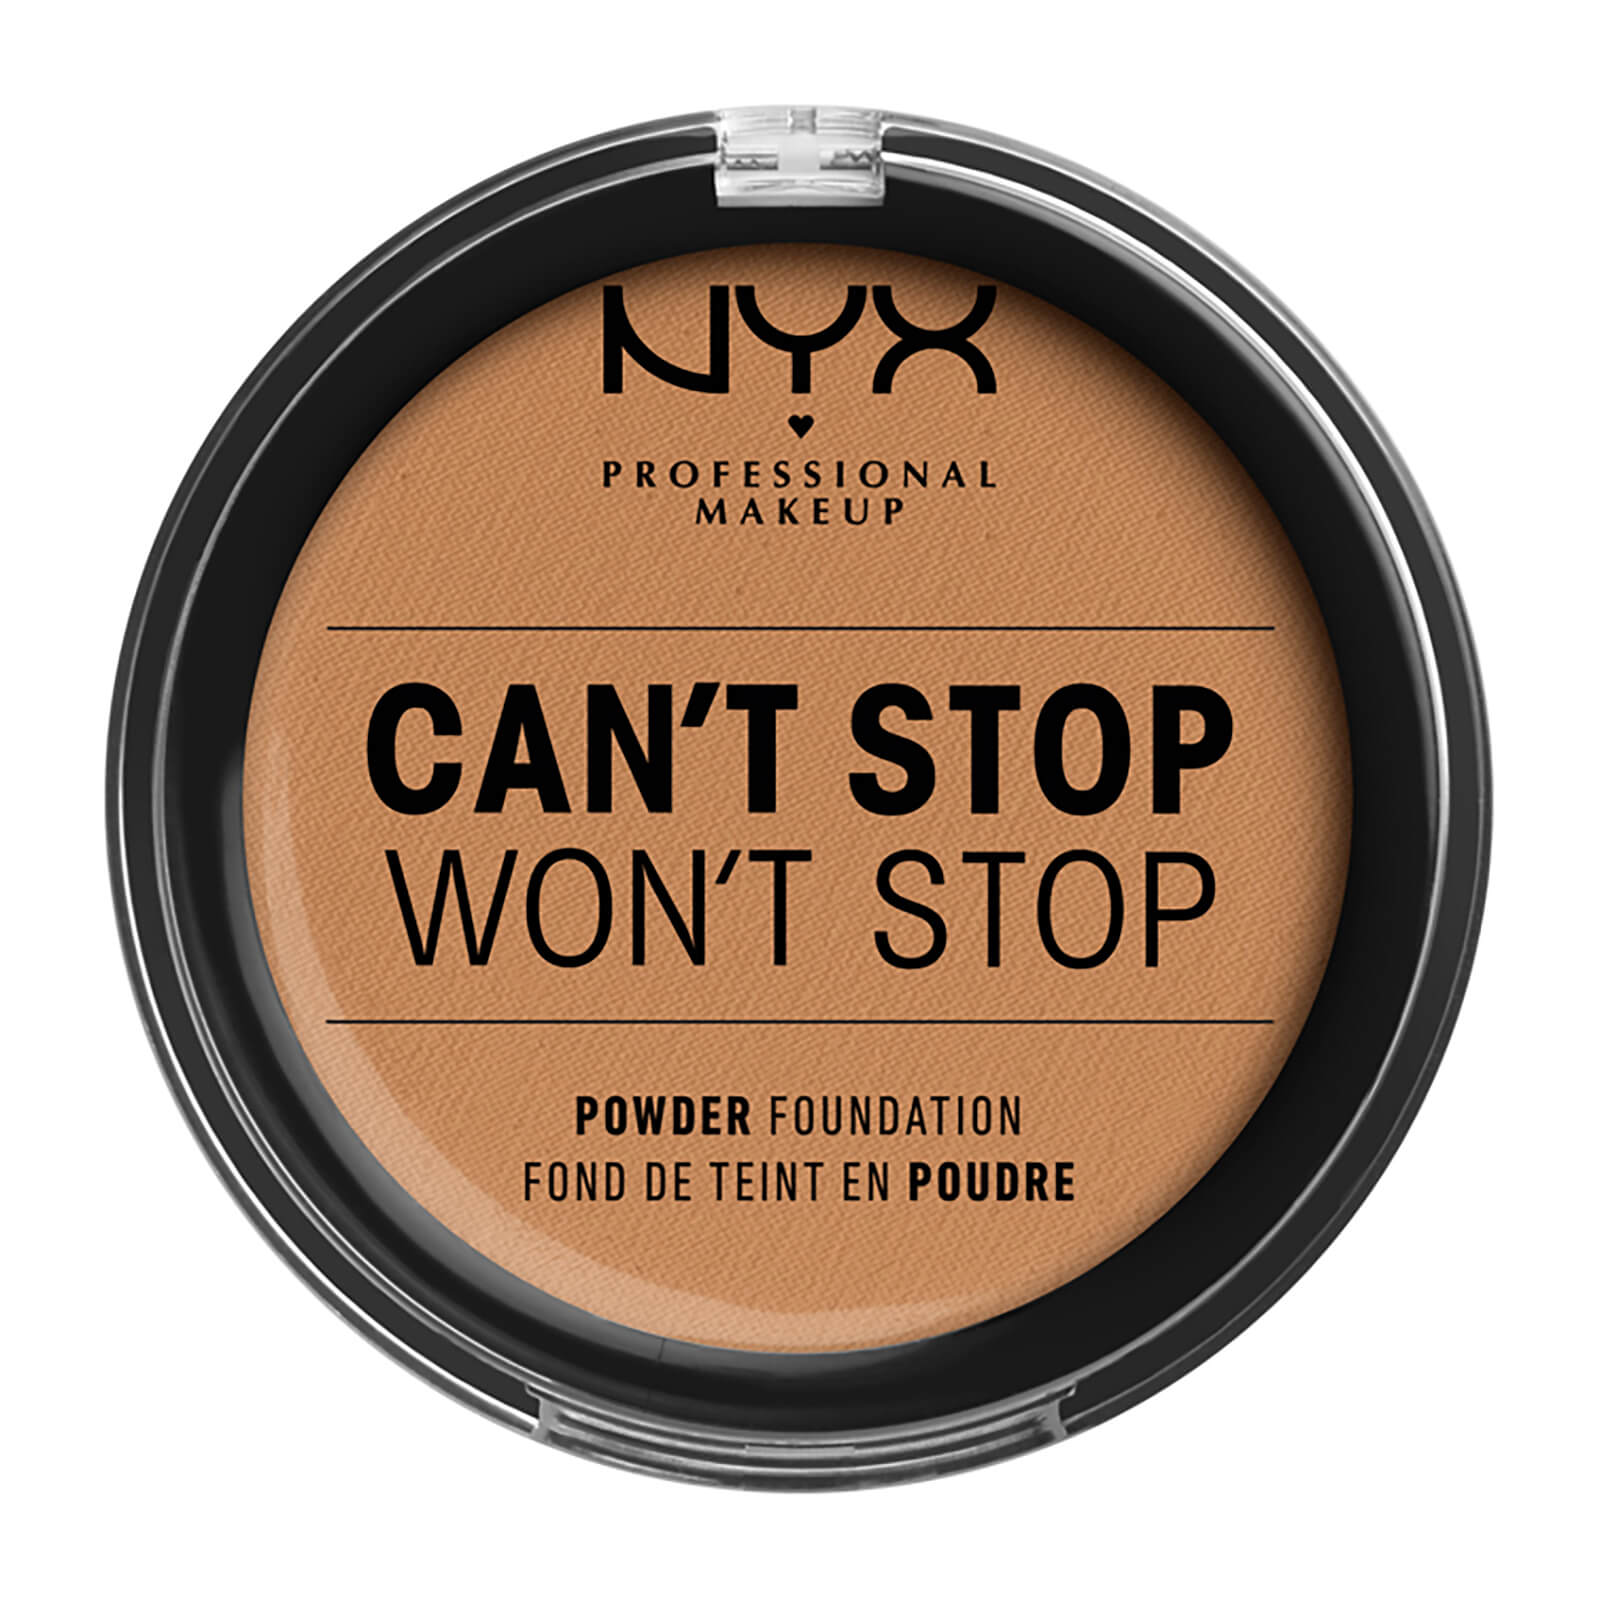 NYX Professional Makeup Can't Stop Won't Stop Powder Foundation (Various Shades) - Golden Honey